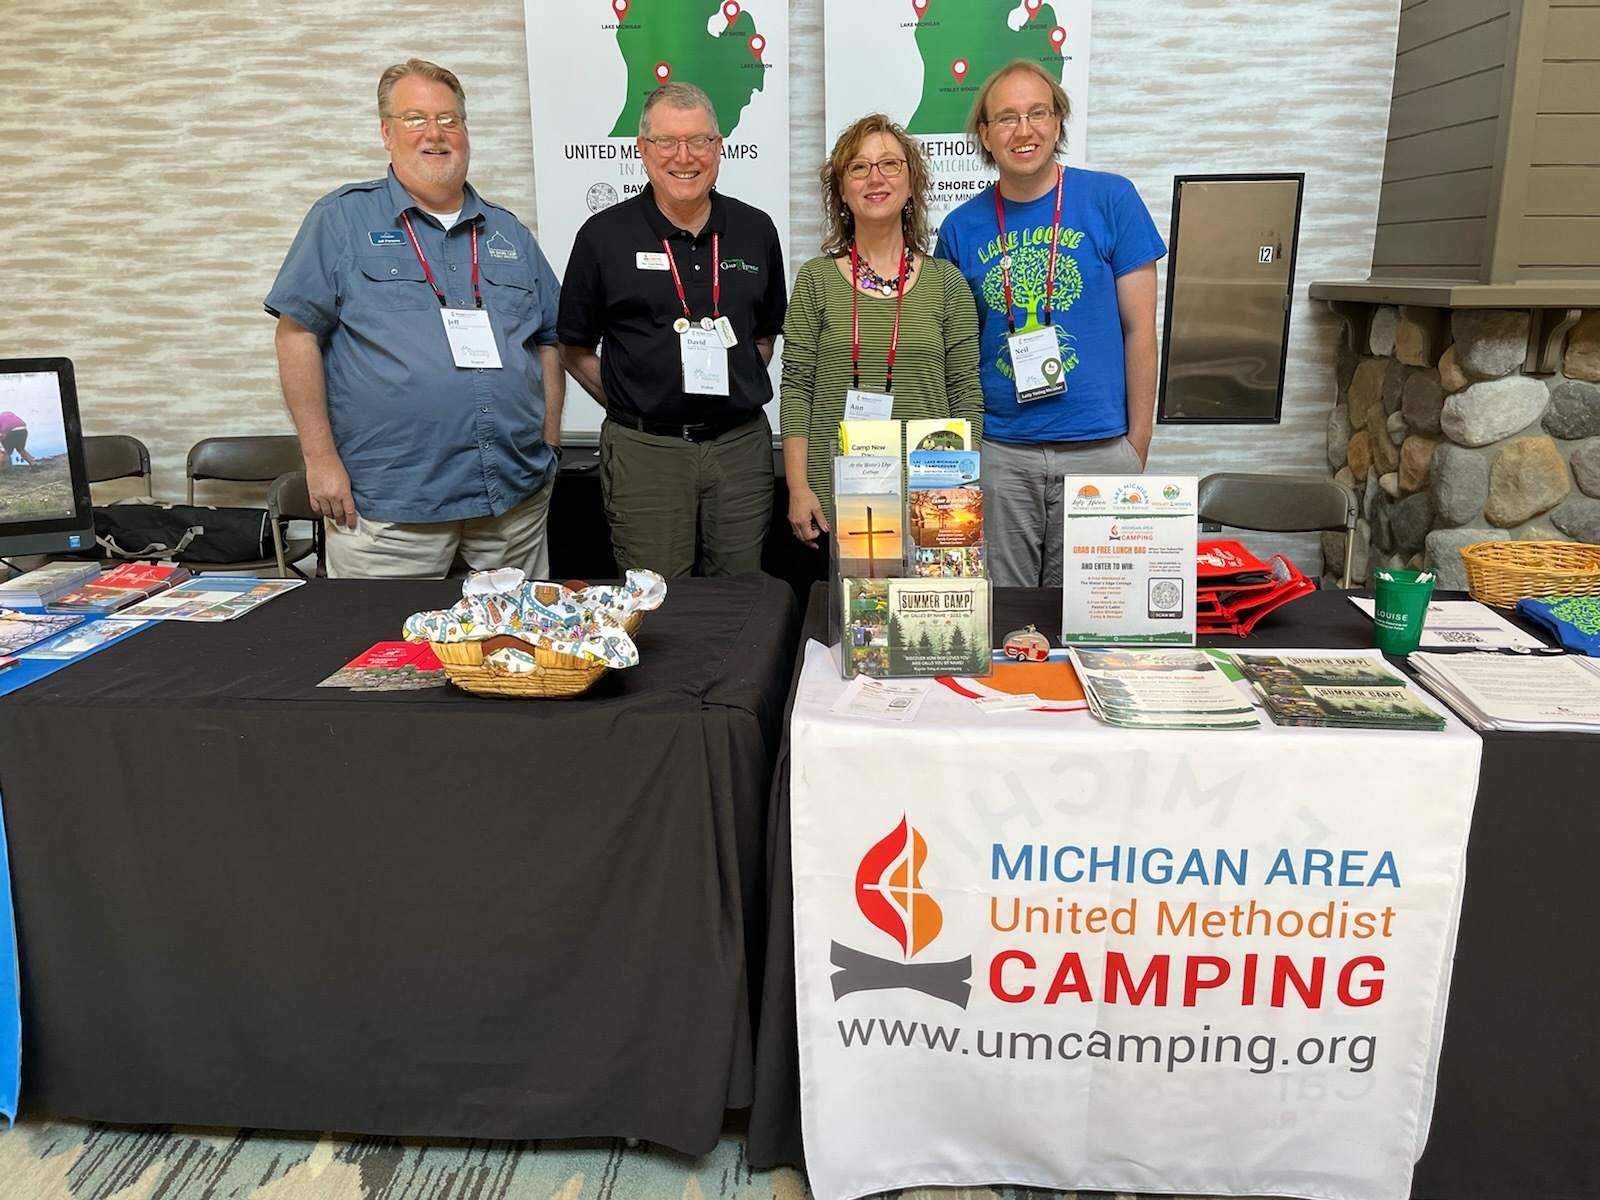 Members of the new camping association